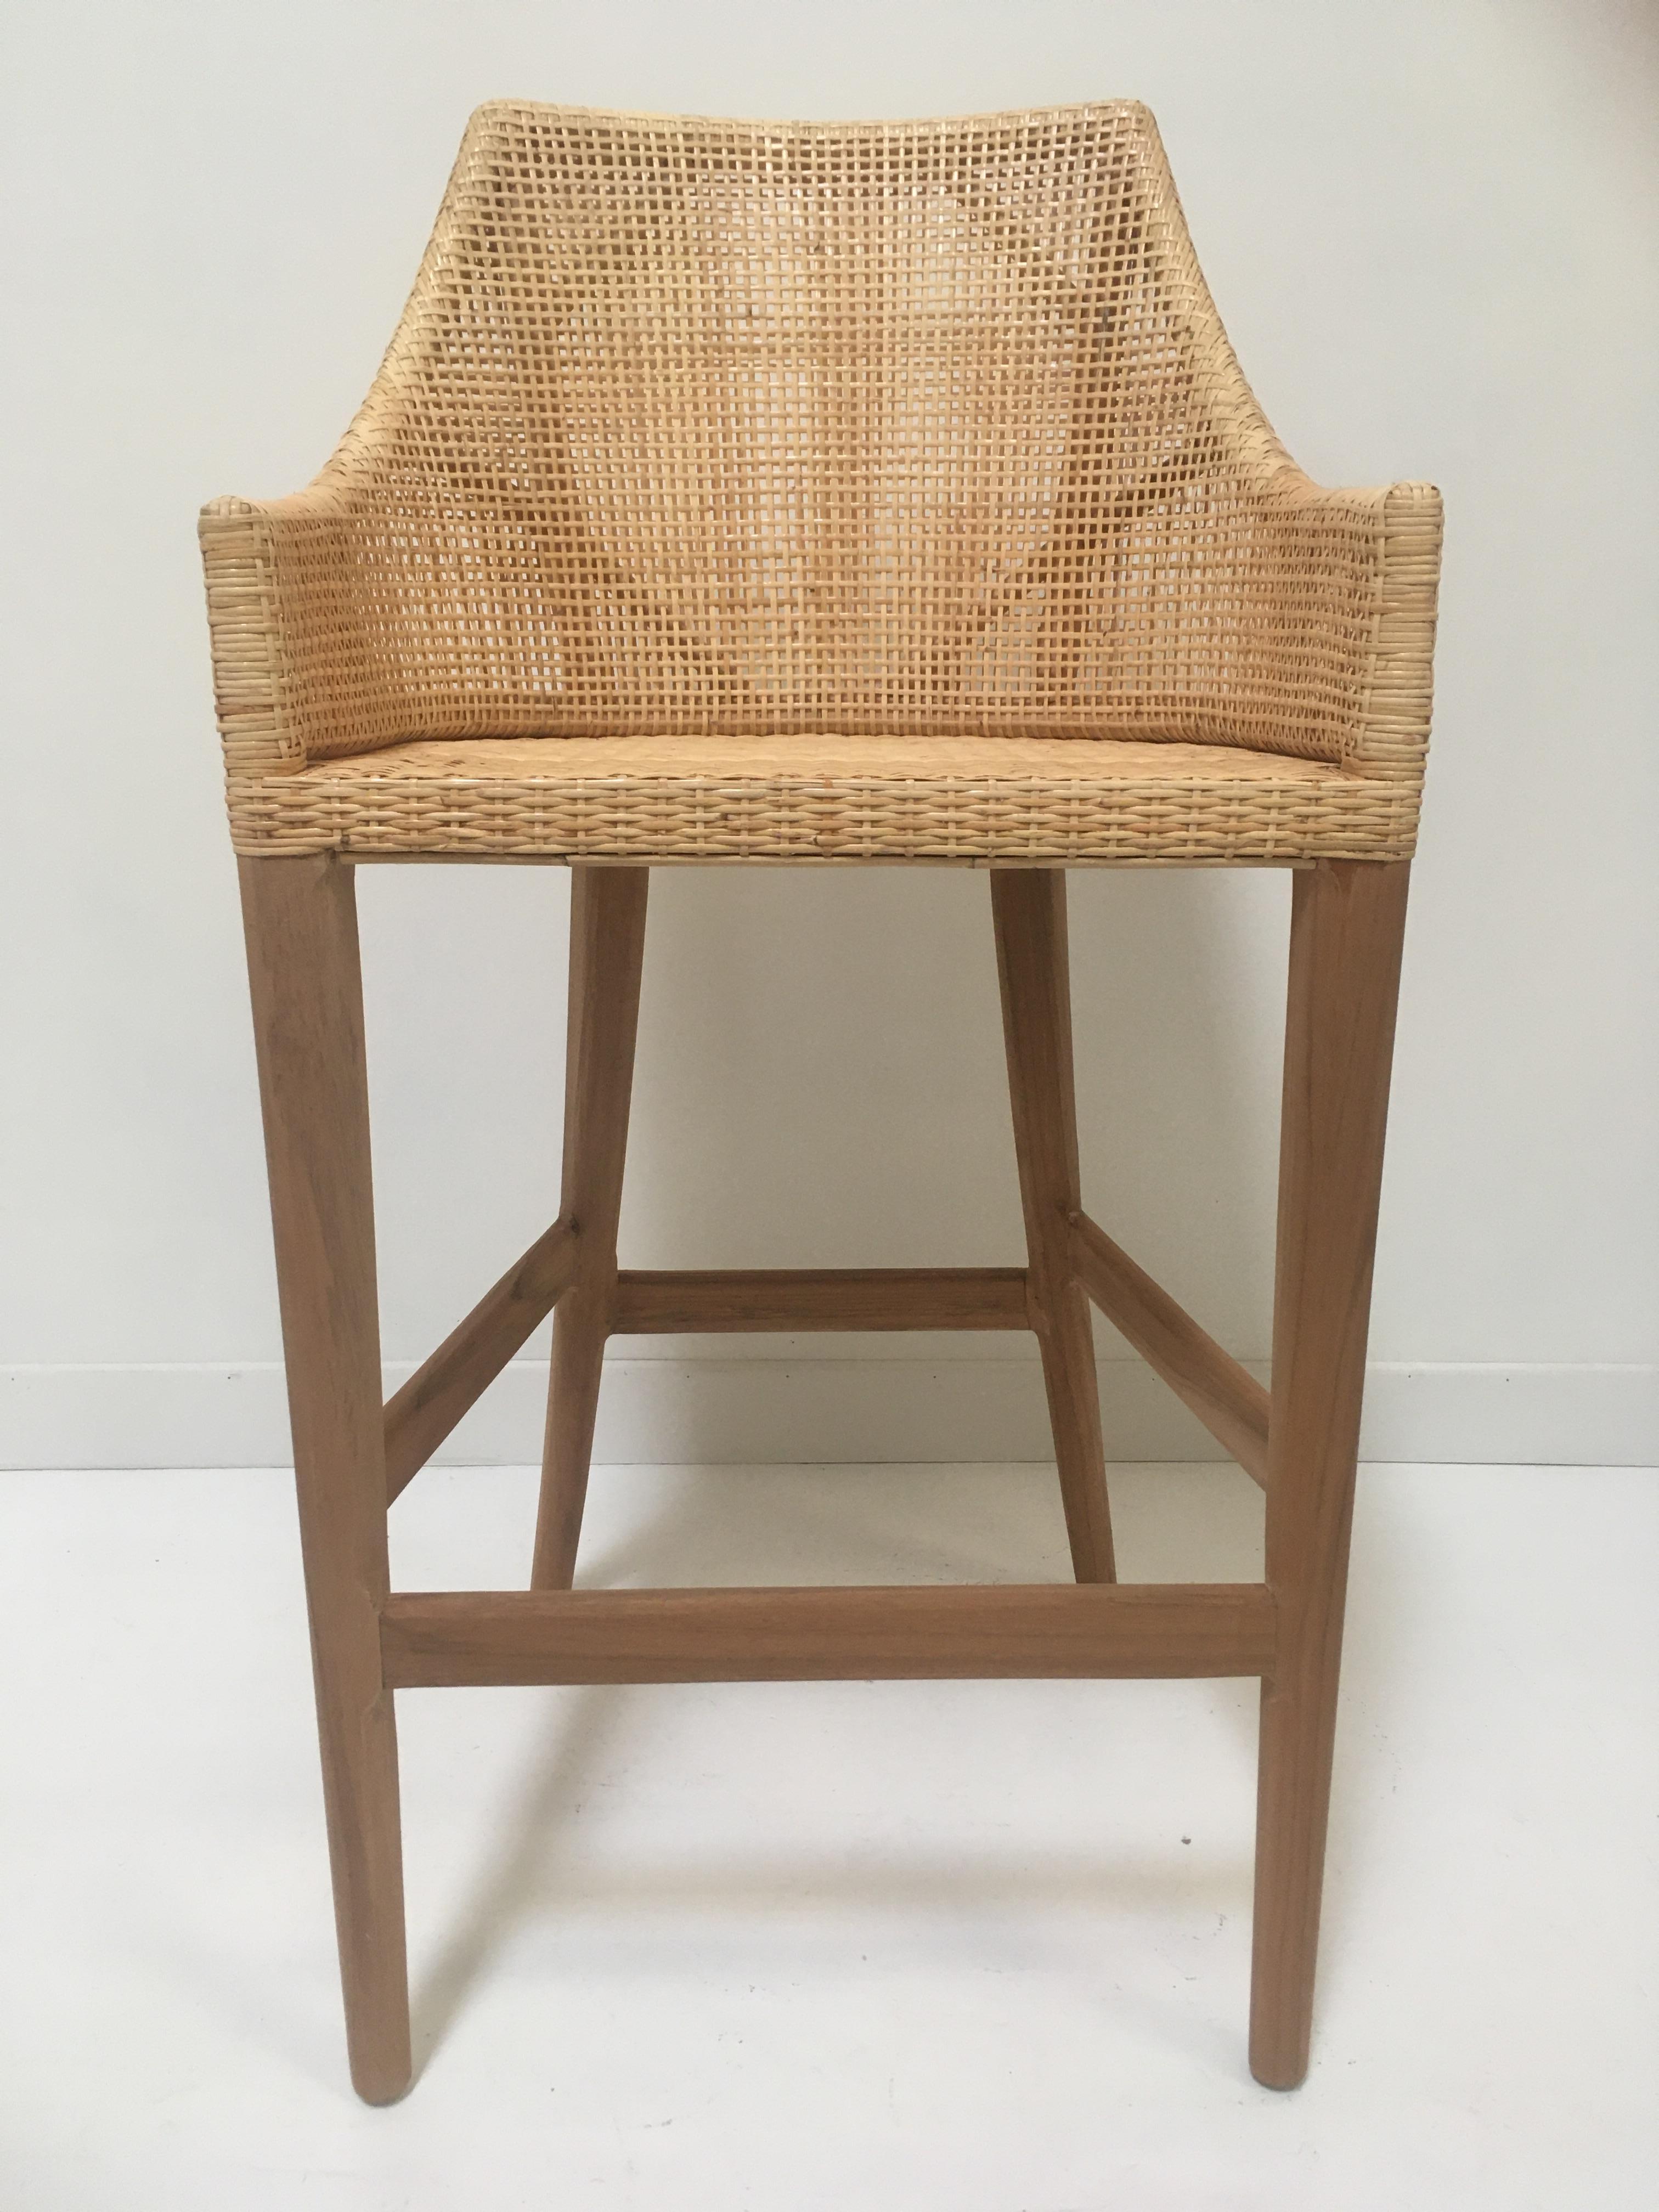 Elegant rattan bar stool with a structure in teak wooden and handbraided rattan wicker cane combining quality, robustness and class. Comfortable and ergonomic, aerial and poetic. The armrests height is 82cm and the seat height is 71cm. In excellent